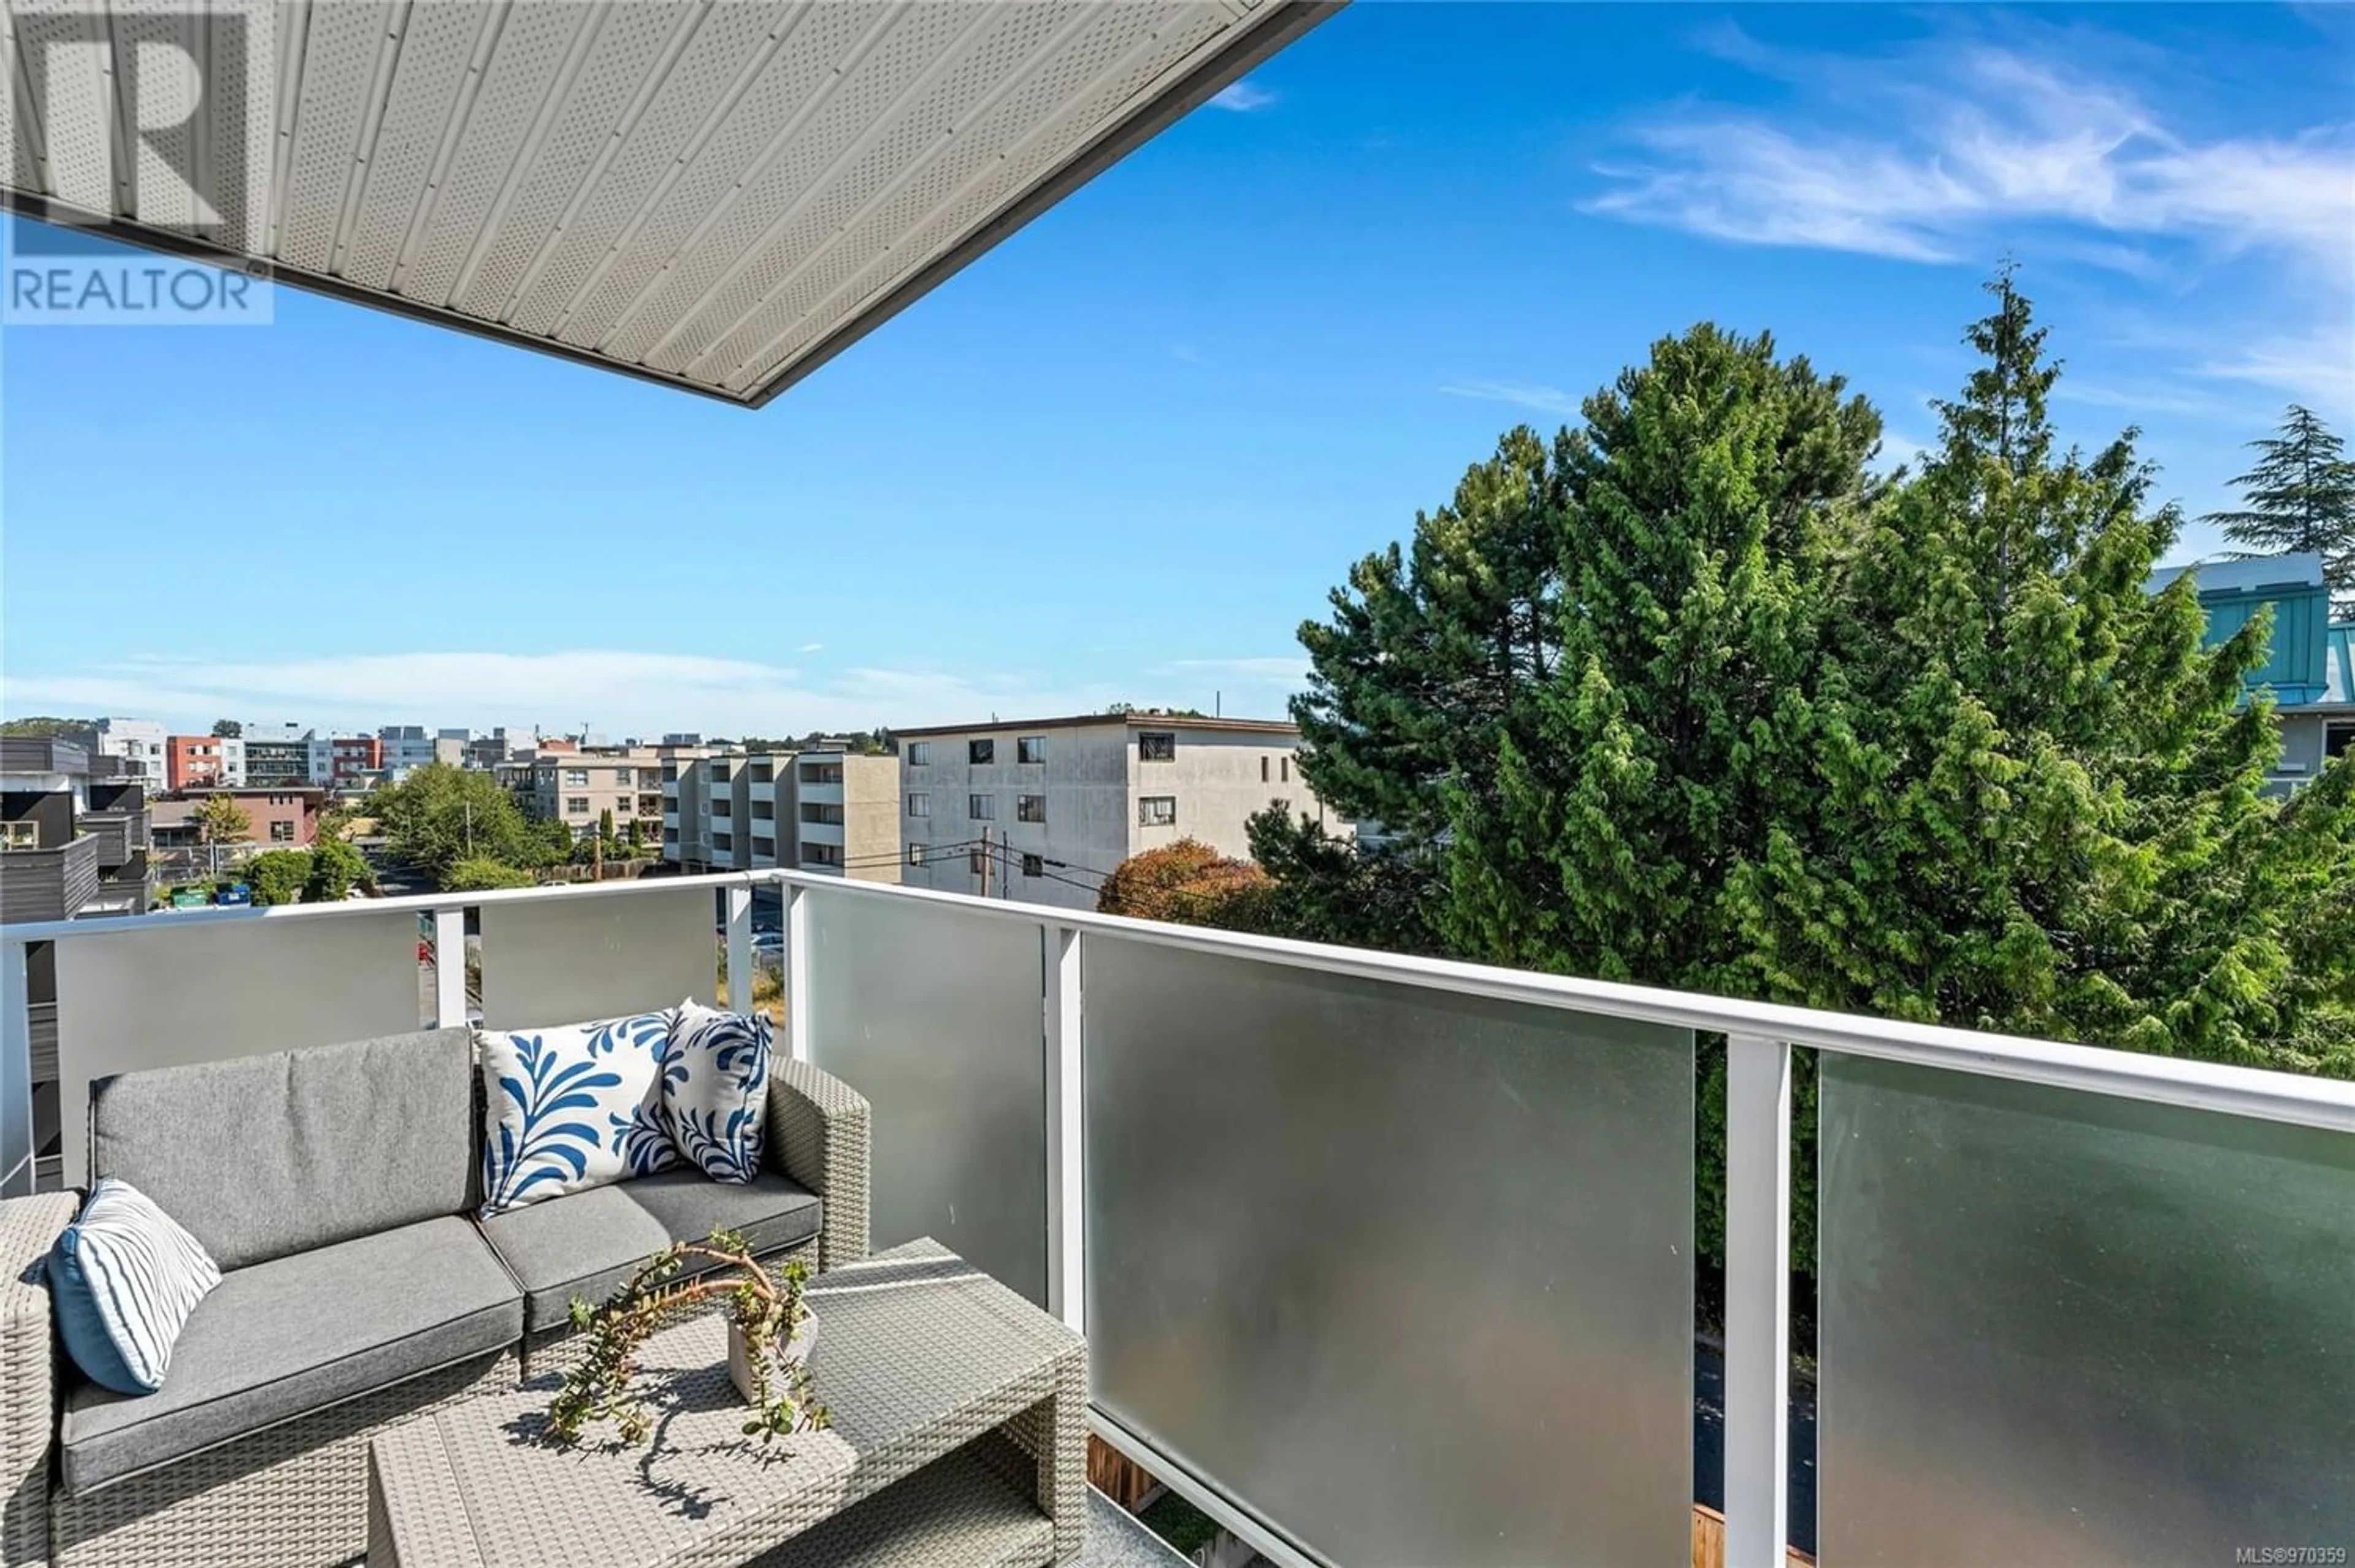 Balcony in the apartment for 304 2515 Dowler Pl, Victoria British Columbia V8T4H7